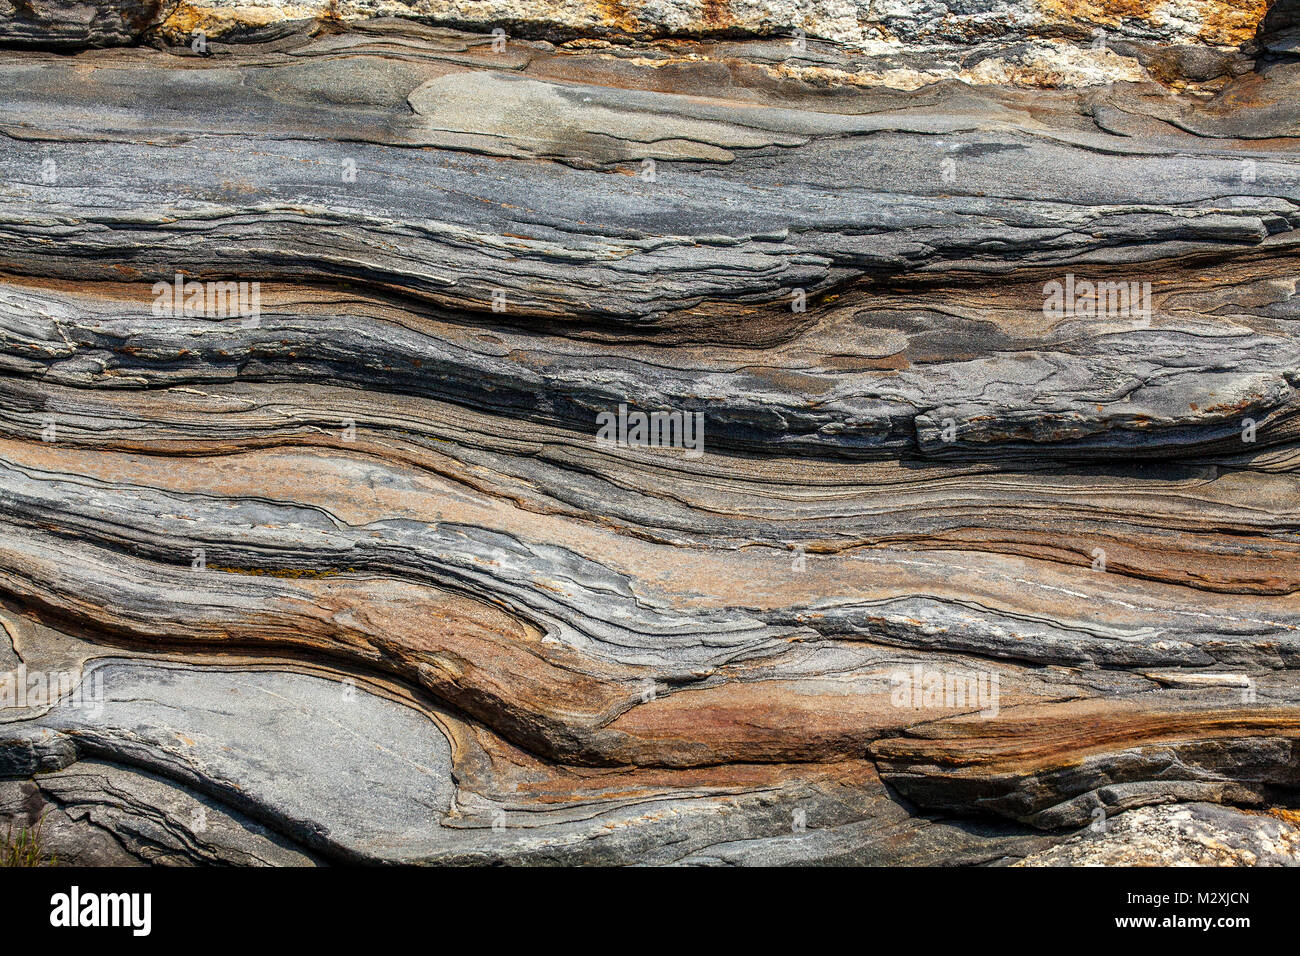 famous metamorphic rock formations